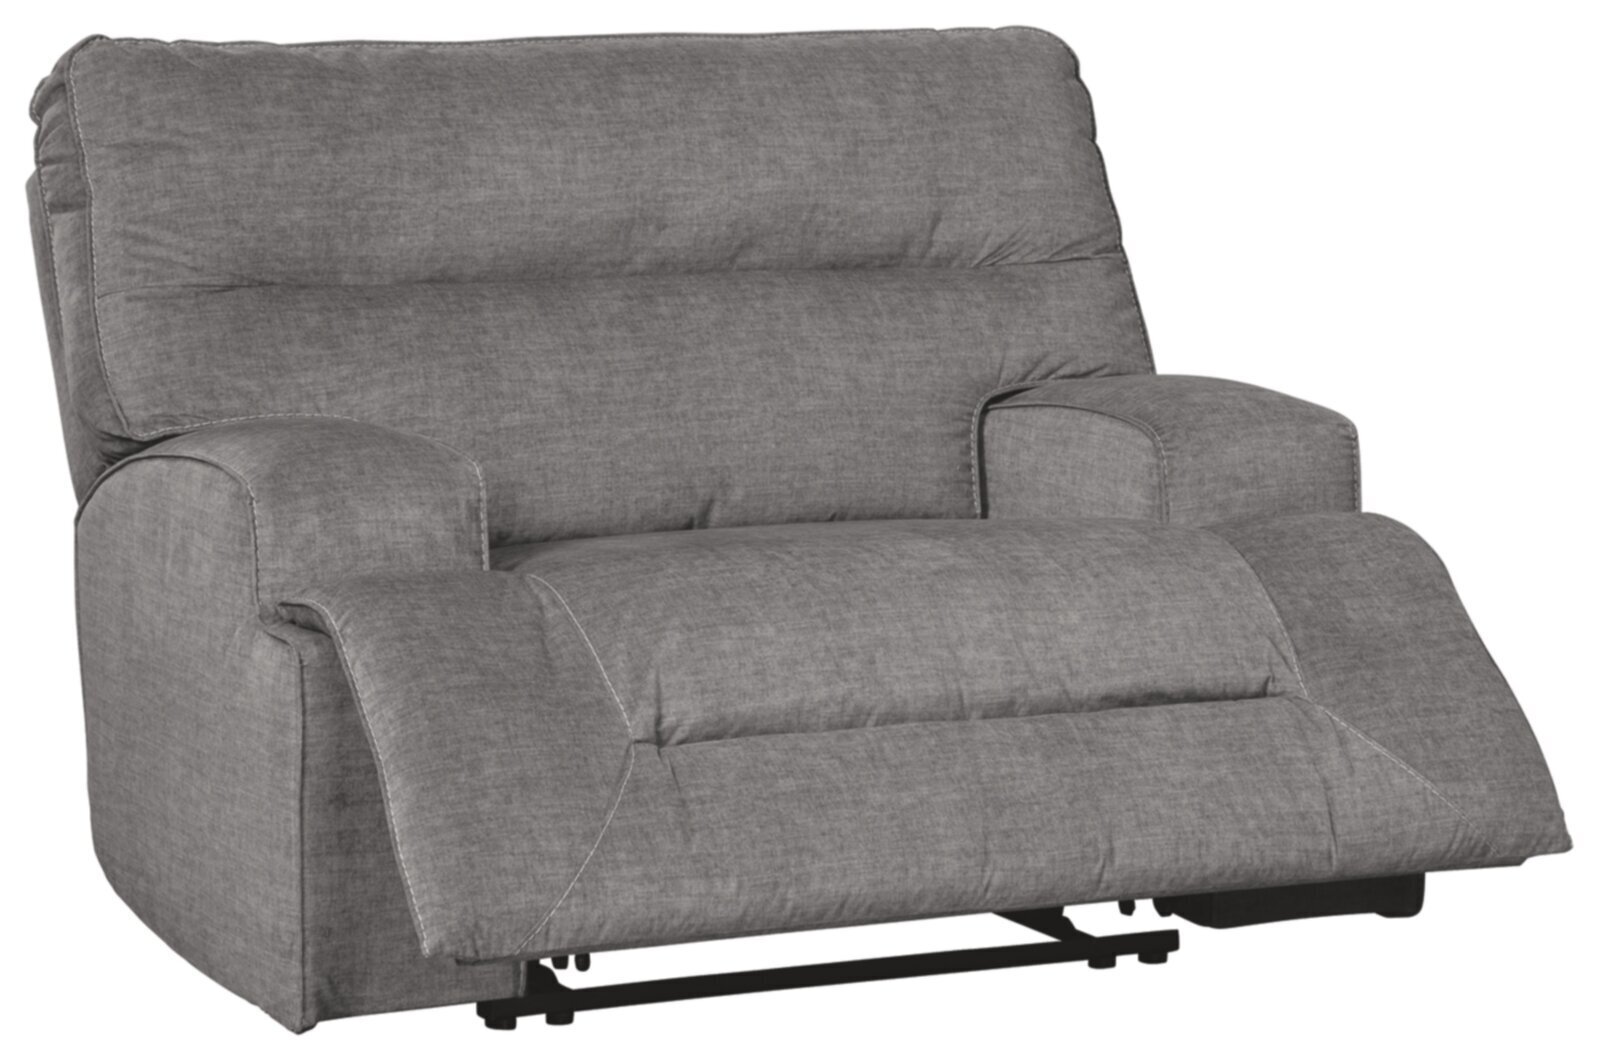 Contemporary Oversized Recliner Chair